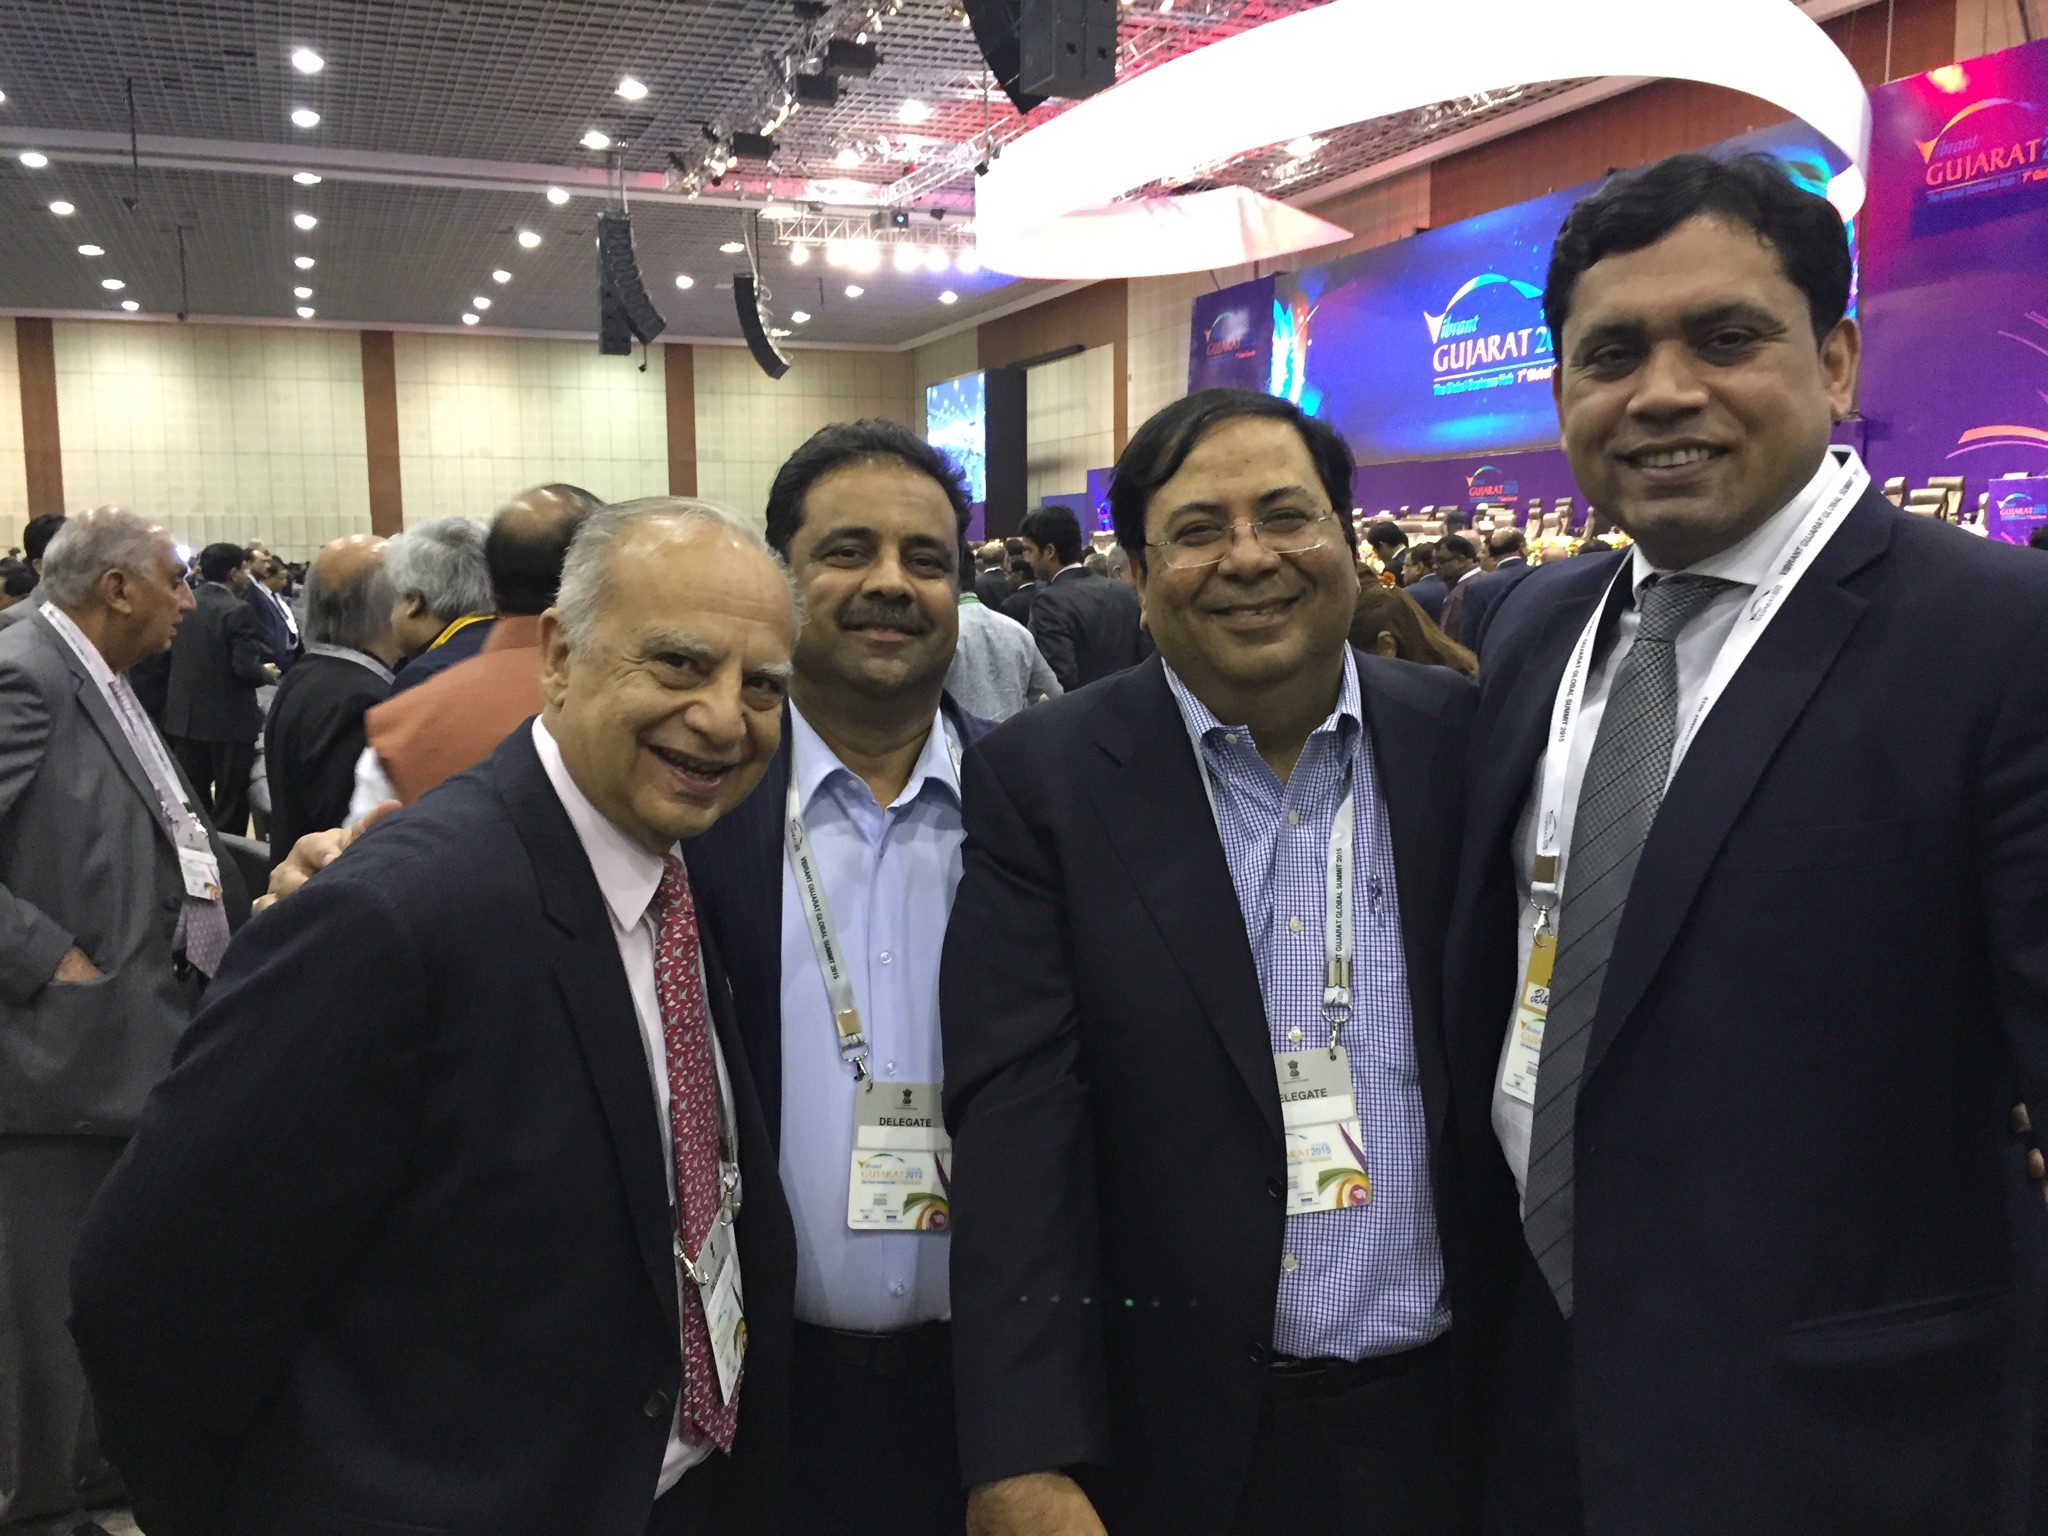  In Photos (Right&nbsp;to Left): Mr.&nbsp;Bharat Kaushal, Managing Director &amp; CEO at Sumitomo Mitsui Banking Corporation with&nbsp;Suresh Nichani, Vice Chairman of RootCorp, Mr.&nbsp;Danny Gaekwad &amp; Mr.&nbsp;Sunder Advani. 